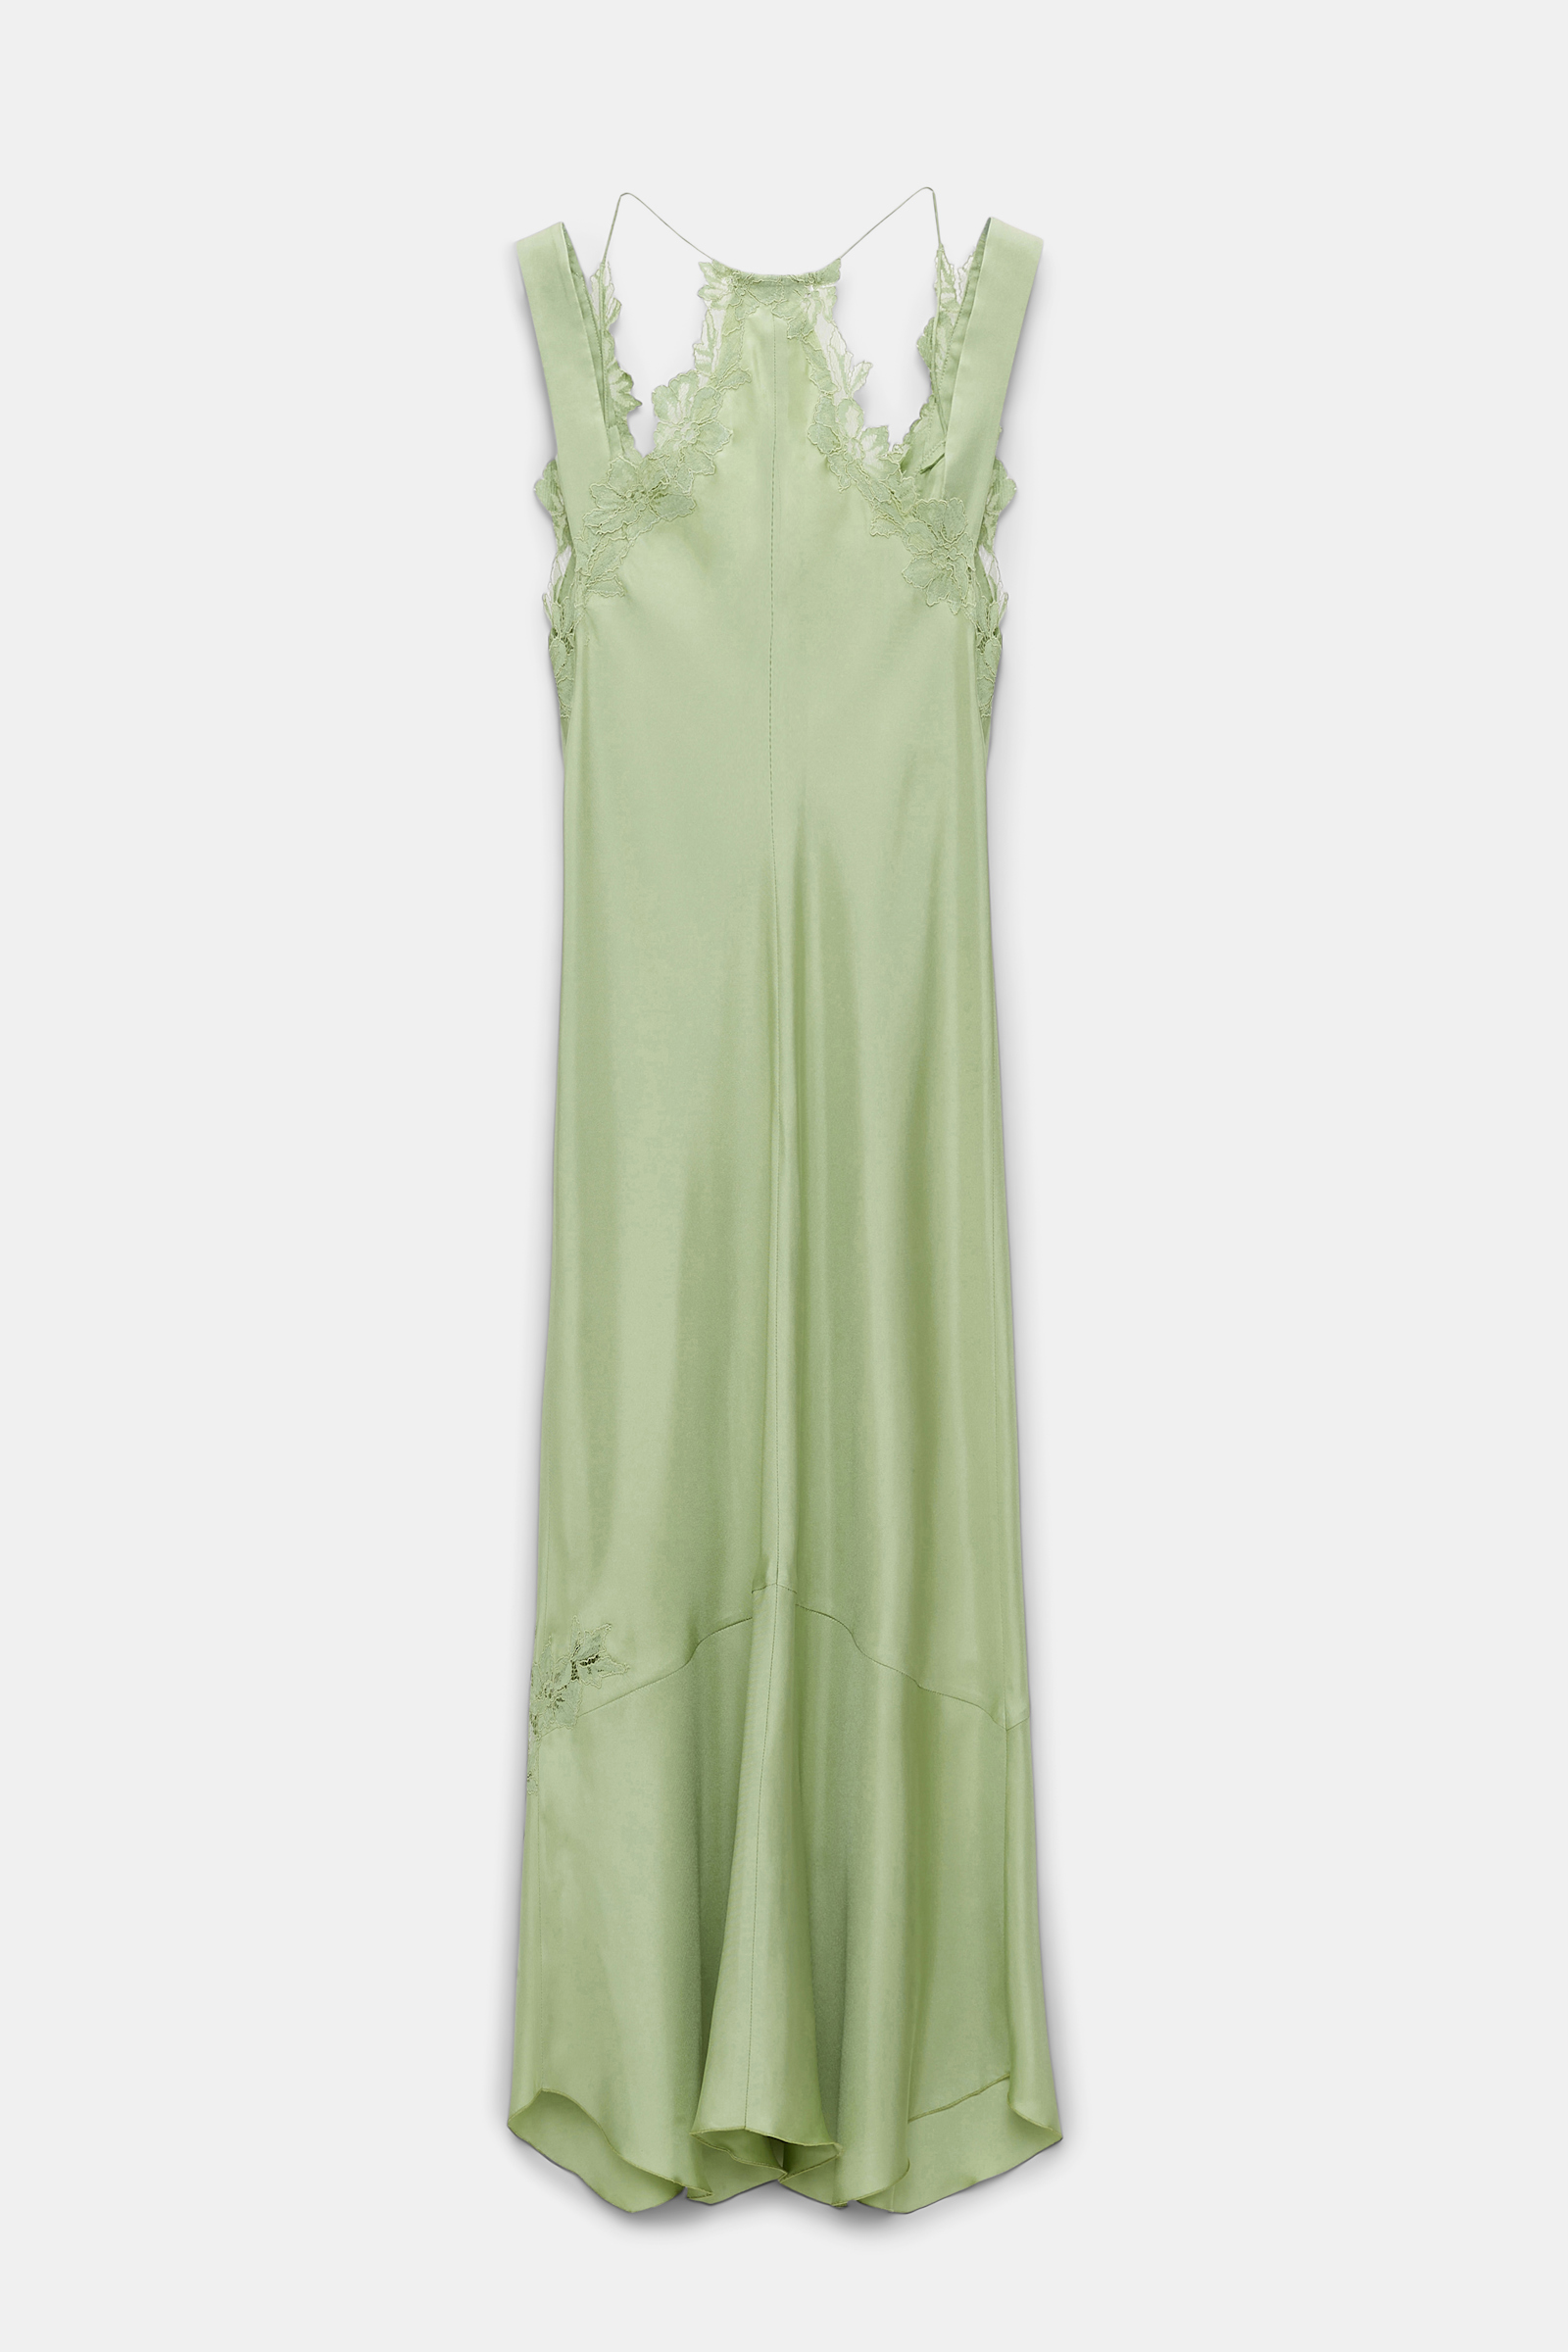 Dorothee Schumacher Silk twill lingerie-style dress with details in lace happy green